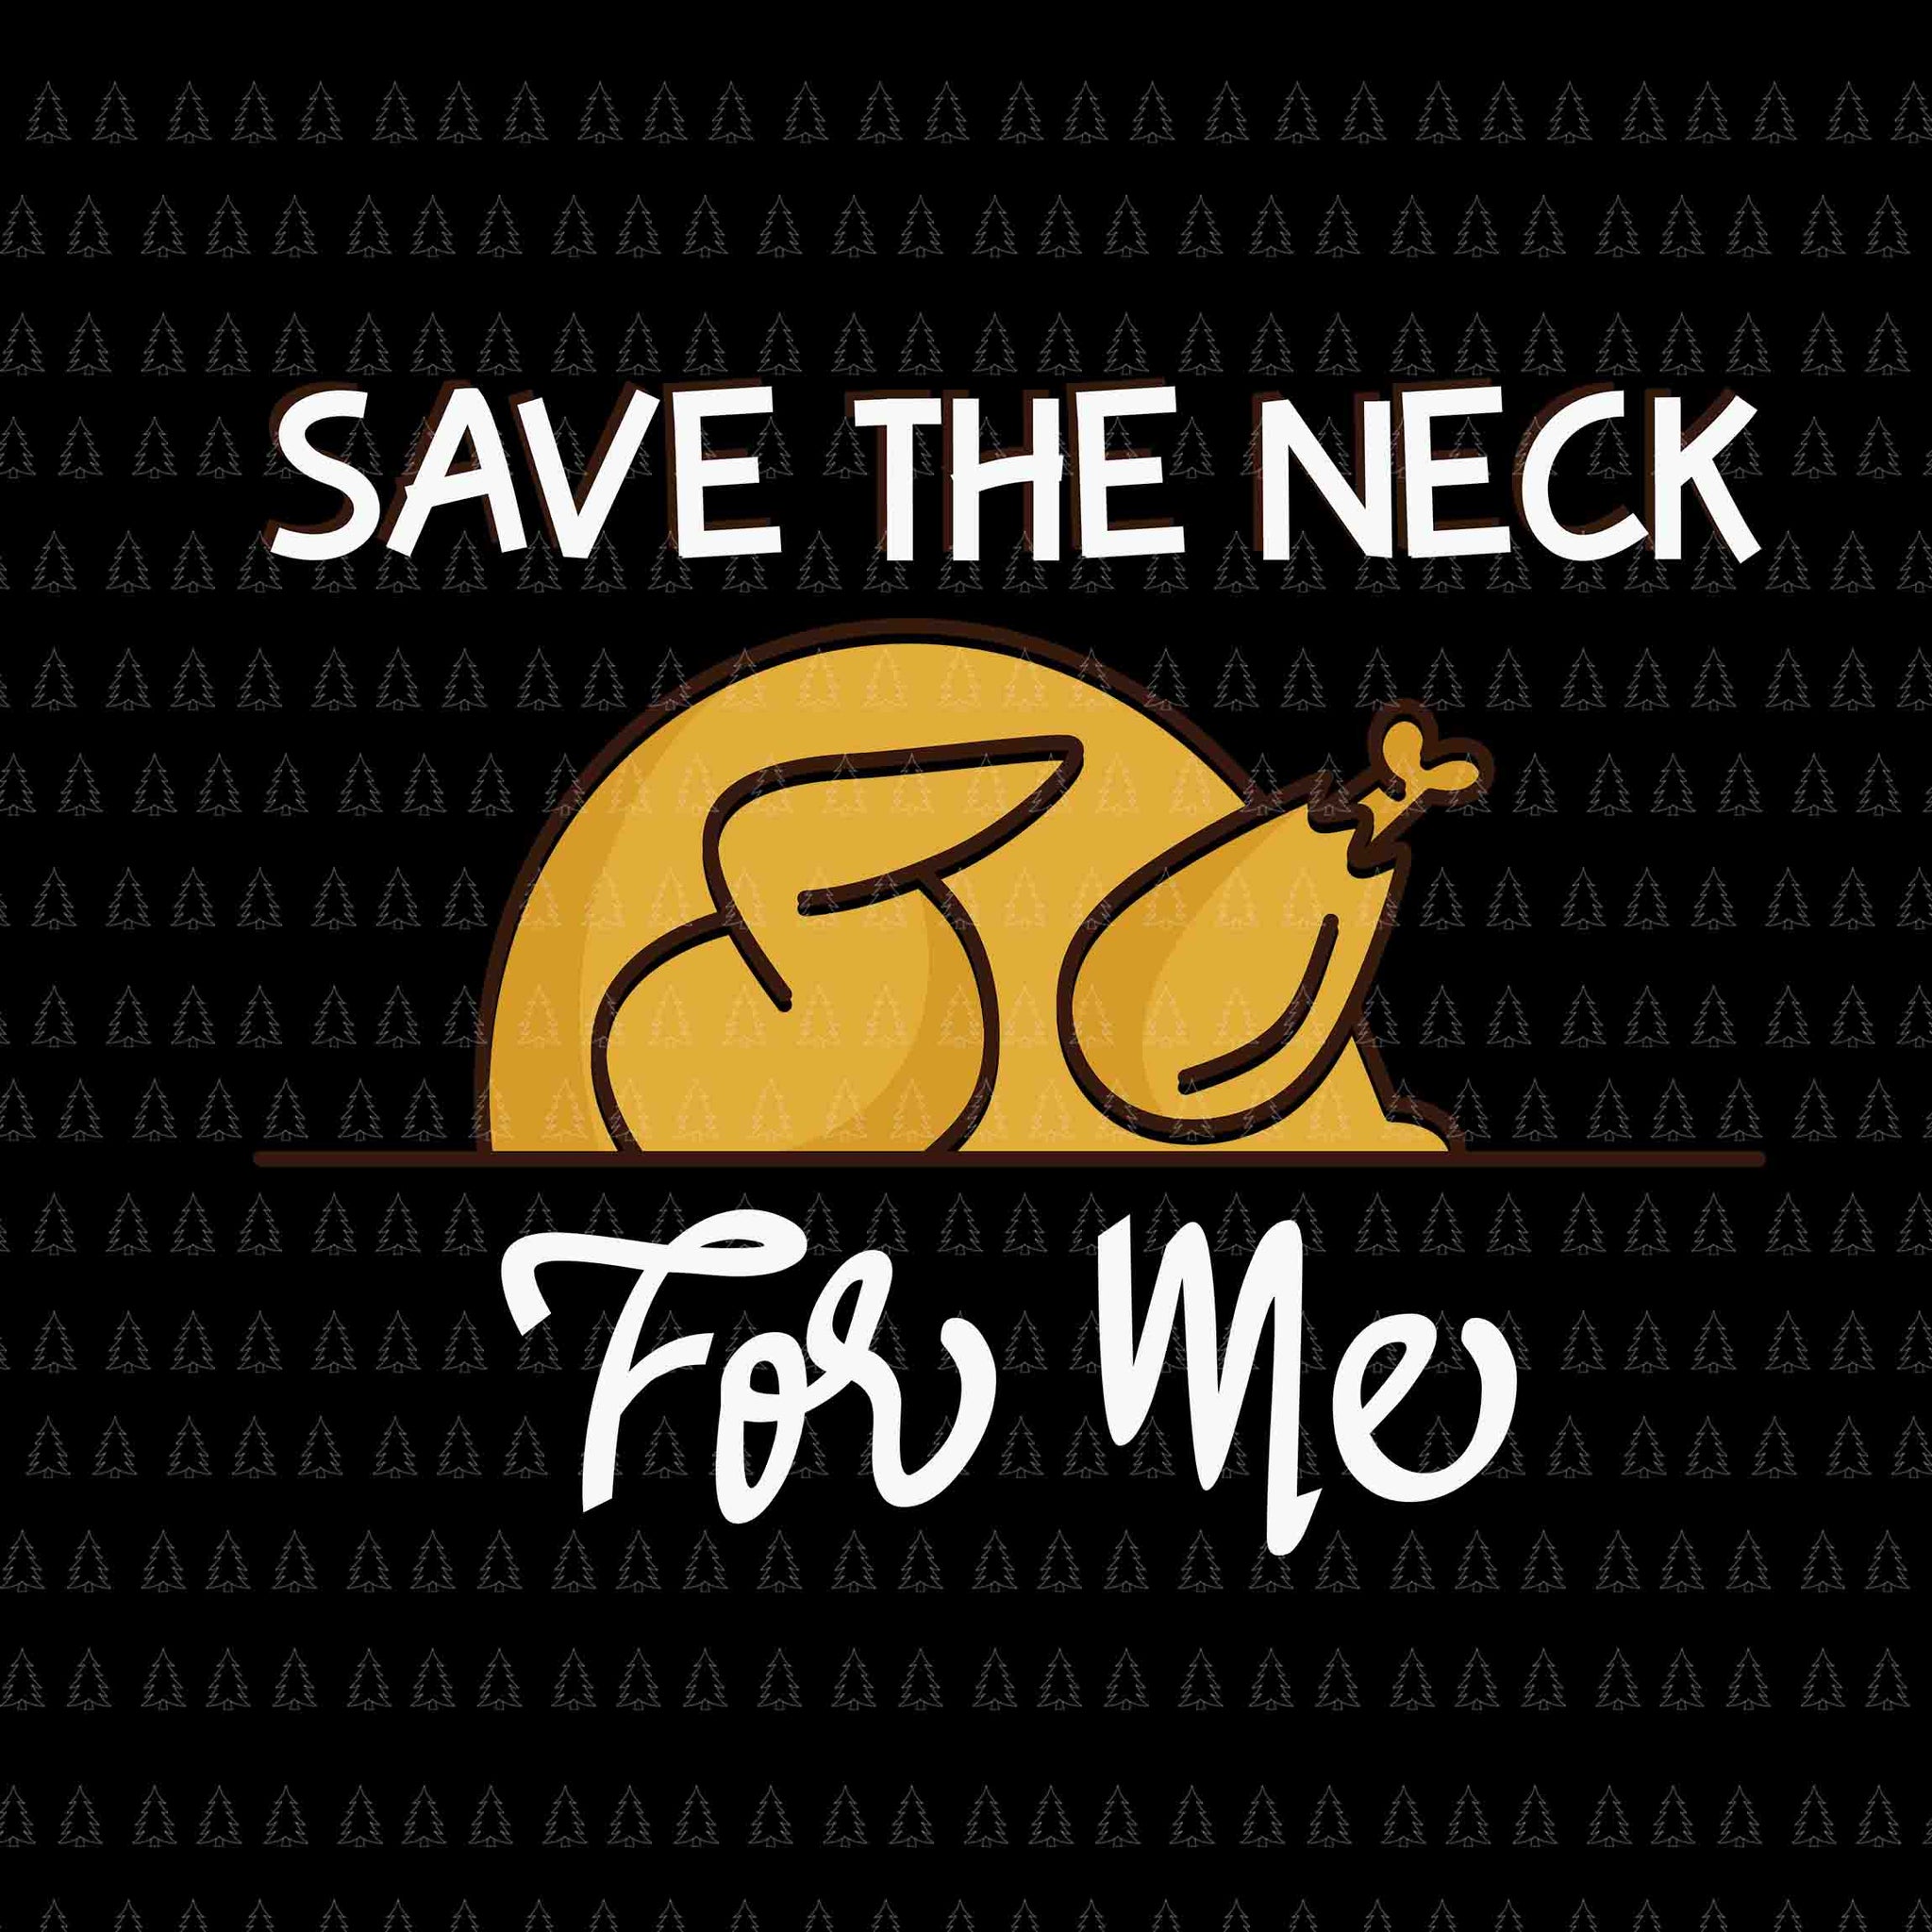 Save The Neck For Me Svg, Happy Thanksgiving Svg, Turkey Svg, Turkey Day Svg, Thanksgiving Svg, Thanksgiving Turkey Svg, Thanksgiving 2021 Svg